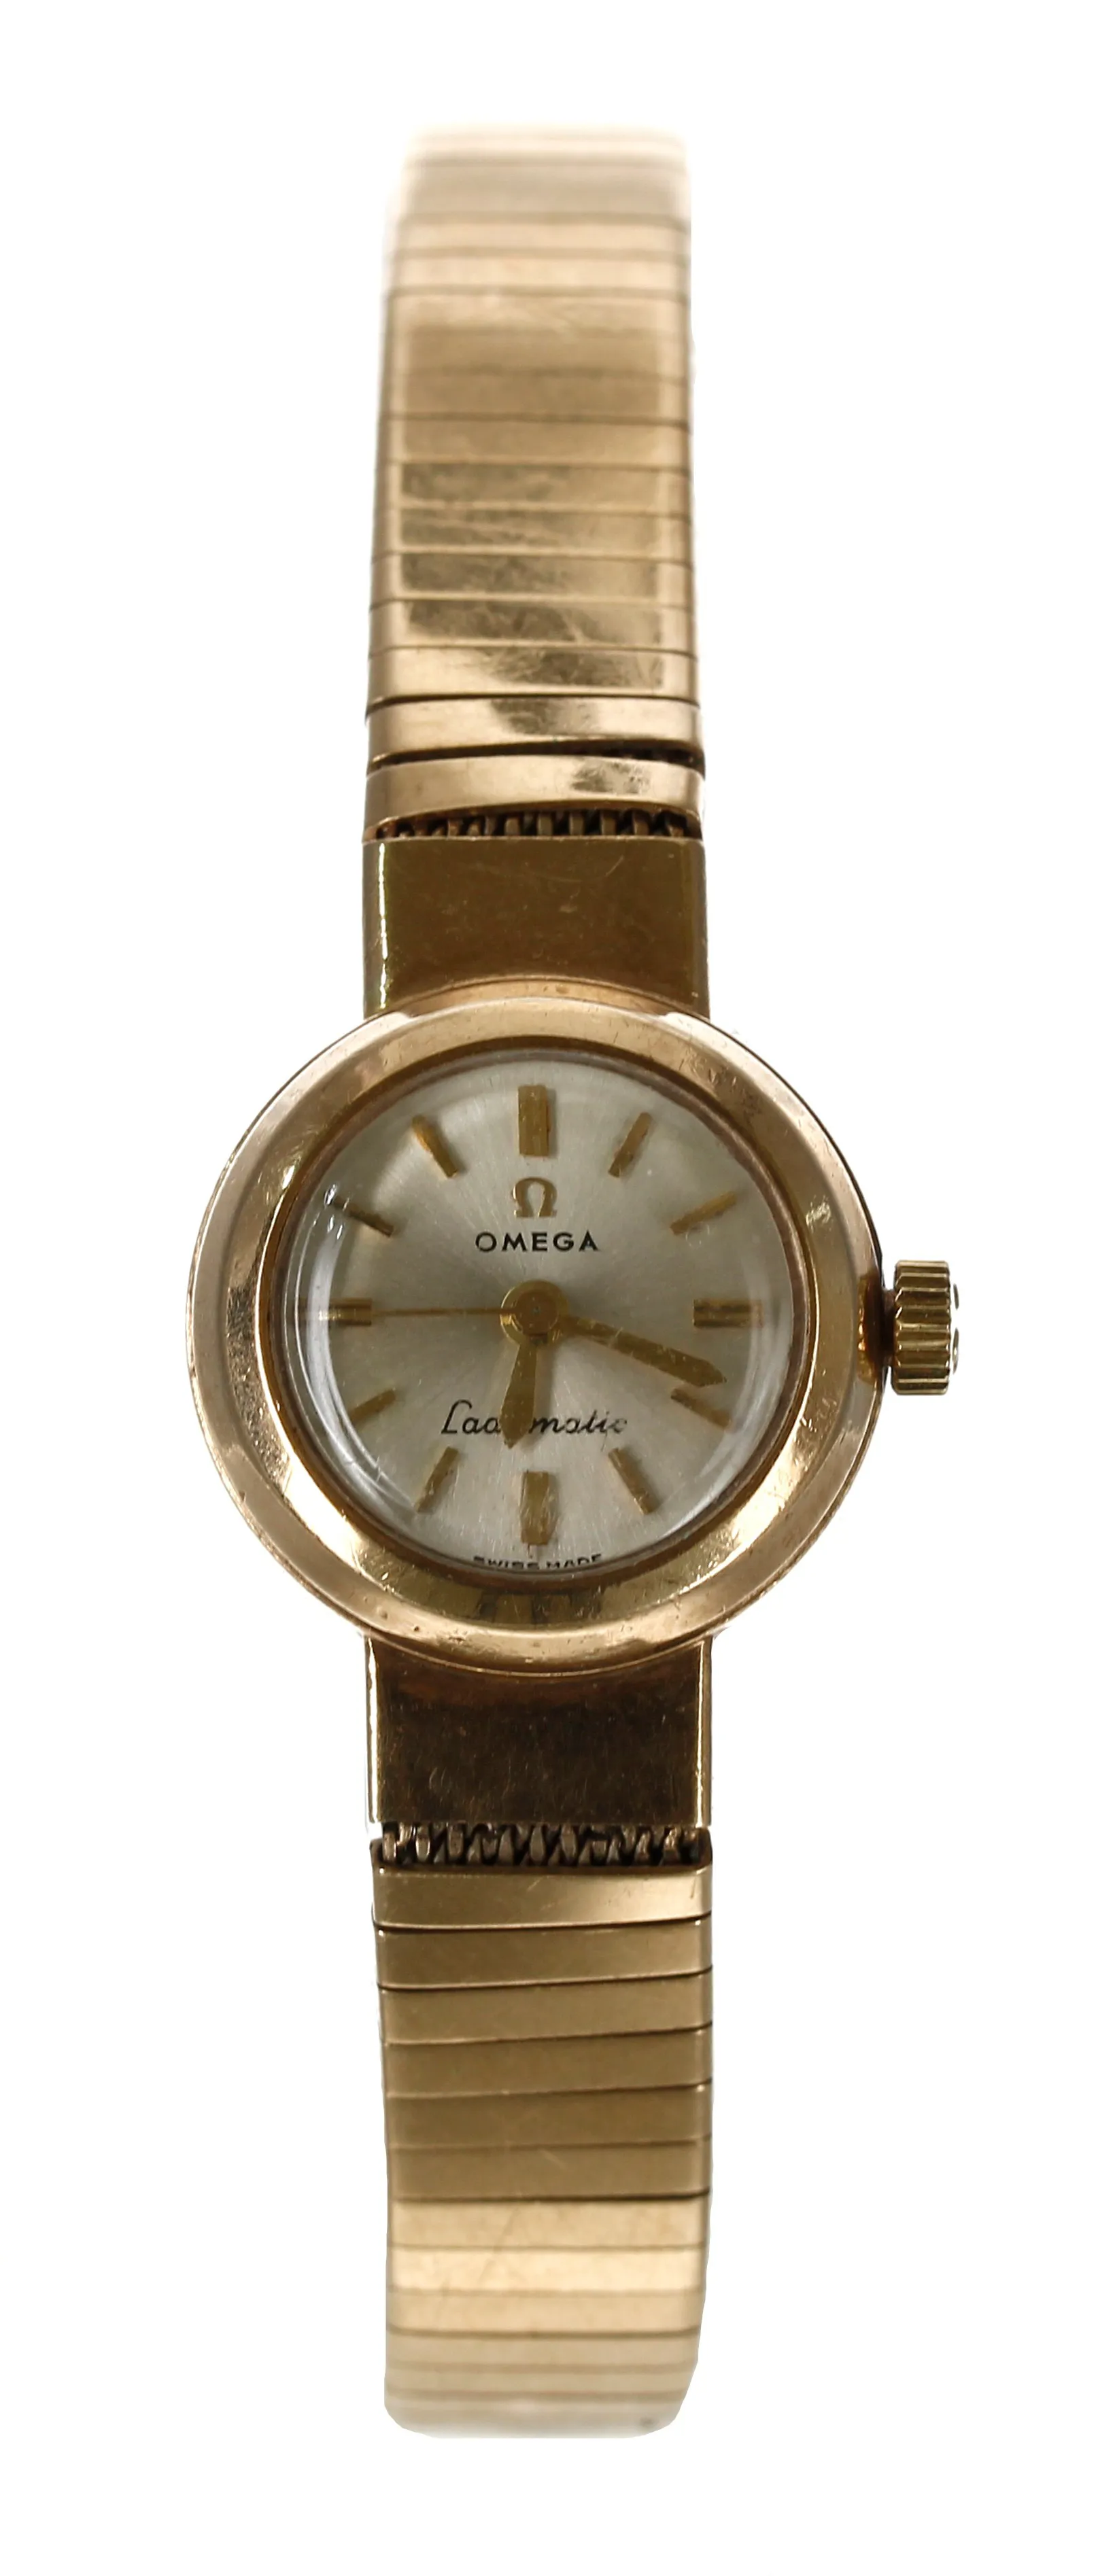 Omega Ladymatic 18mm Yellow gold Silver